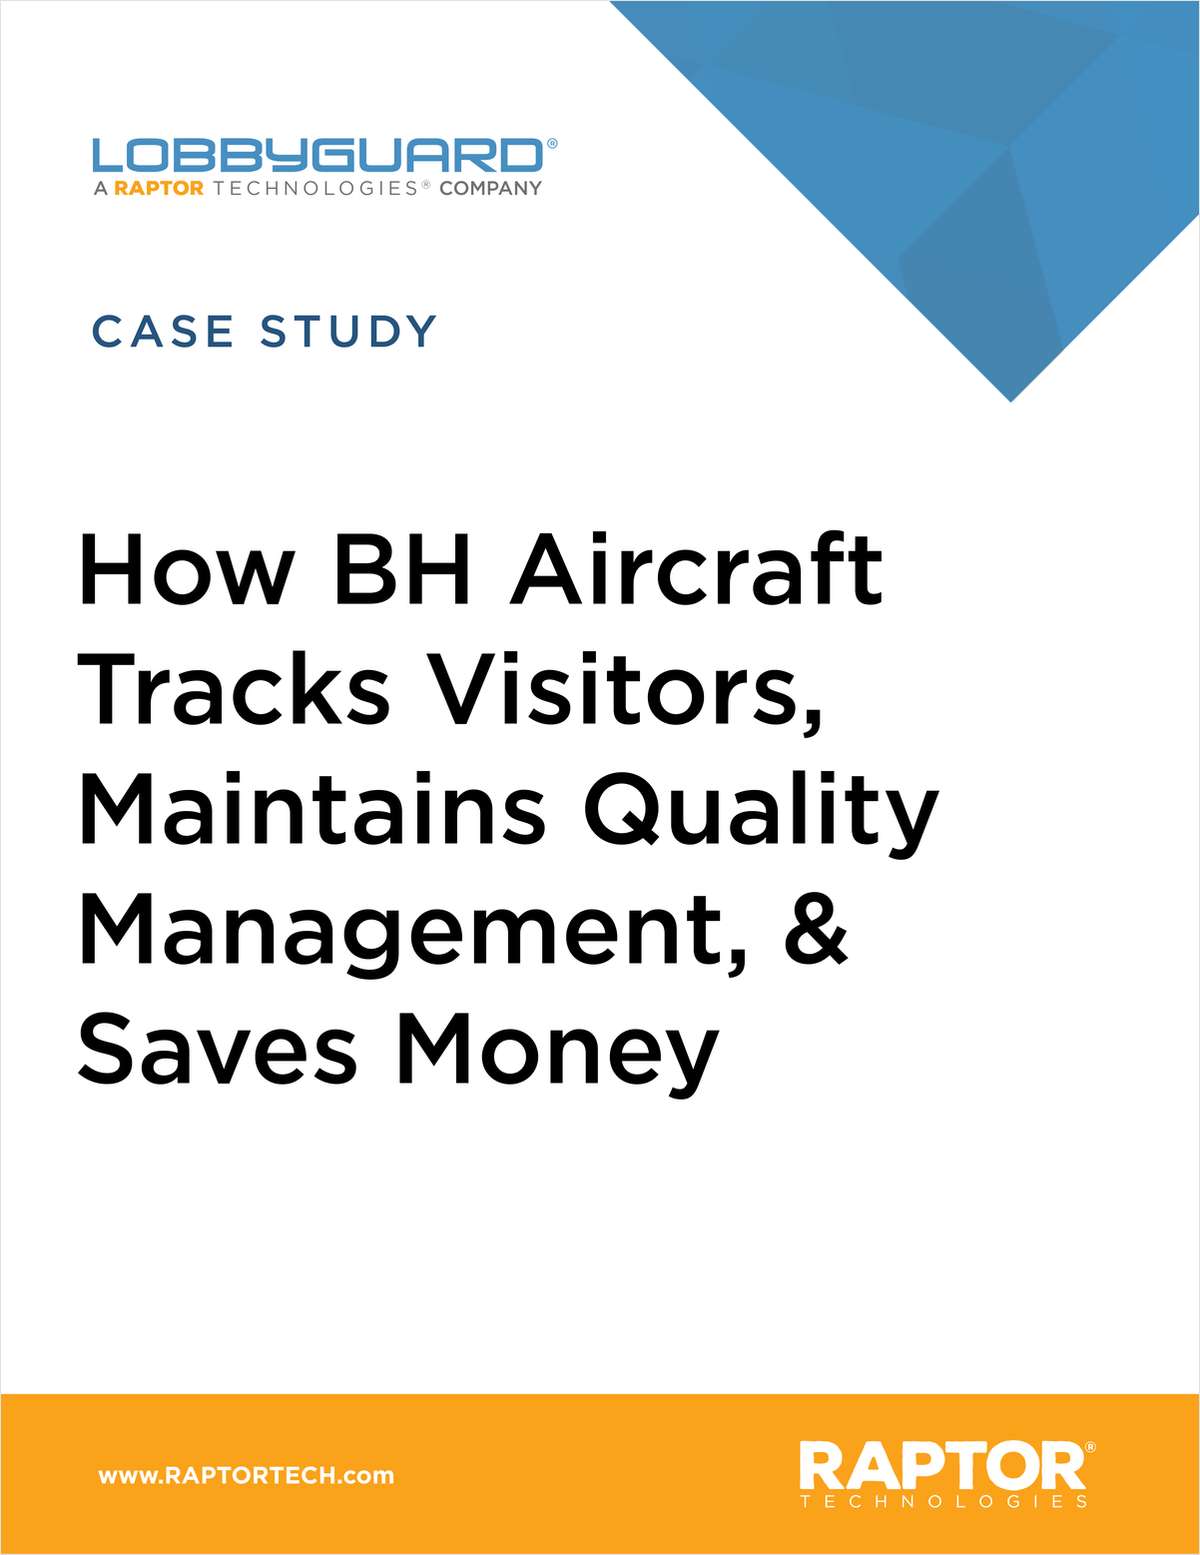 BH Aircraft Tracks Visitors, Maintains Quality Management Certification, Saves Money